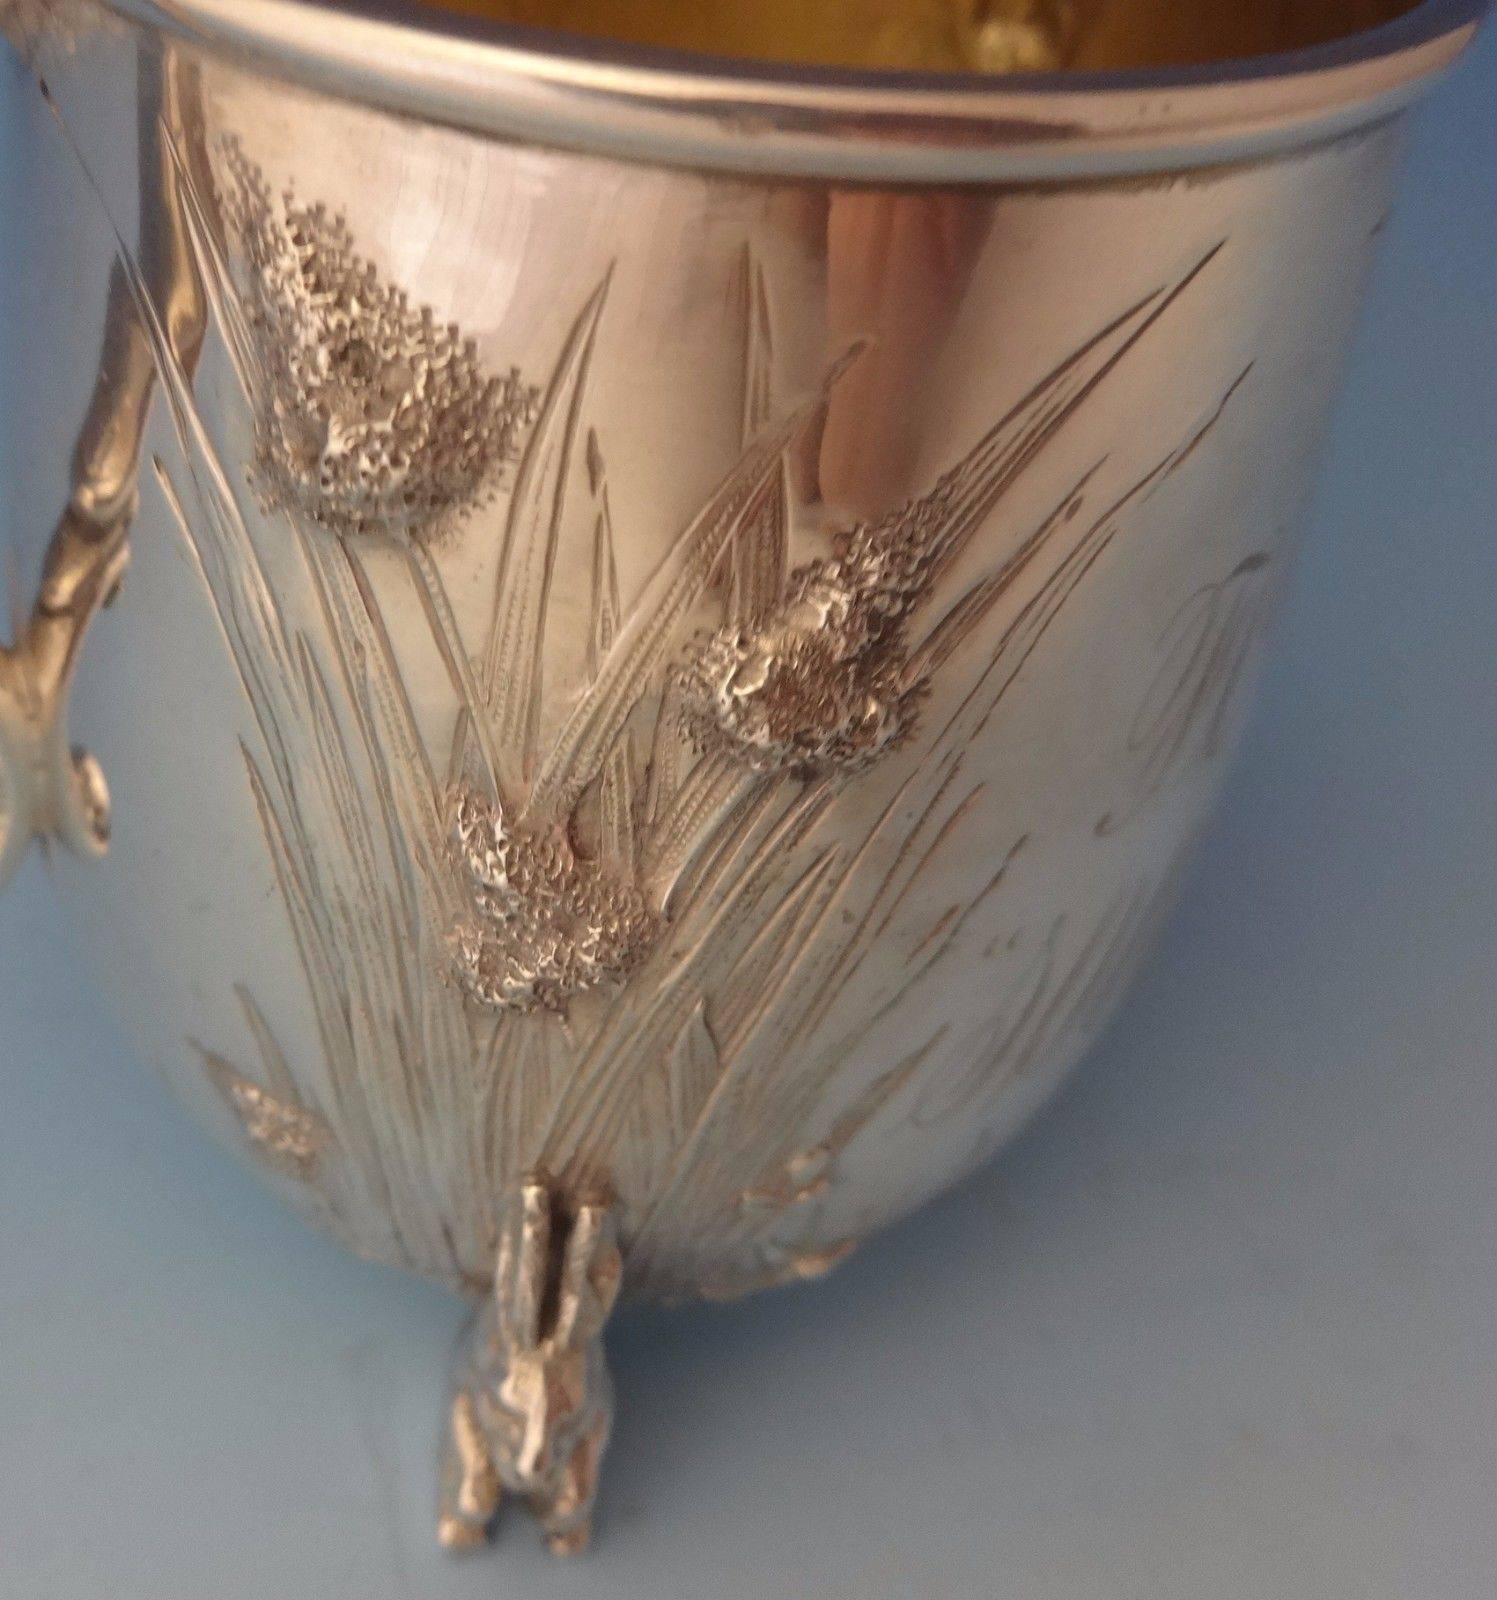 This fine sterling Easter Bunny baby cup was made by Tiffany & Co. featuring 3-D rabbits as the feet. It is repoussed and chased with grasses and foliage. There is also a bright cut spider web. It has a gold washed interior. The piece is monogrammed